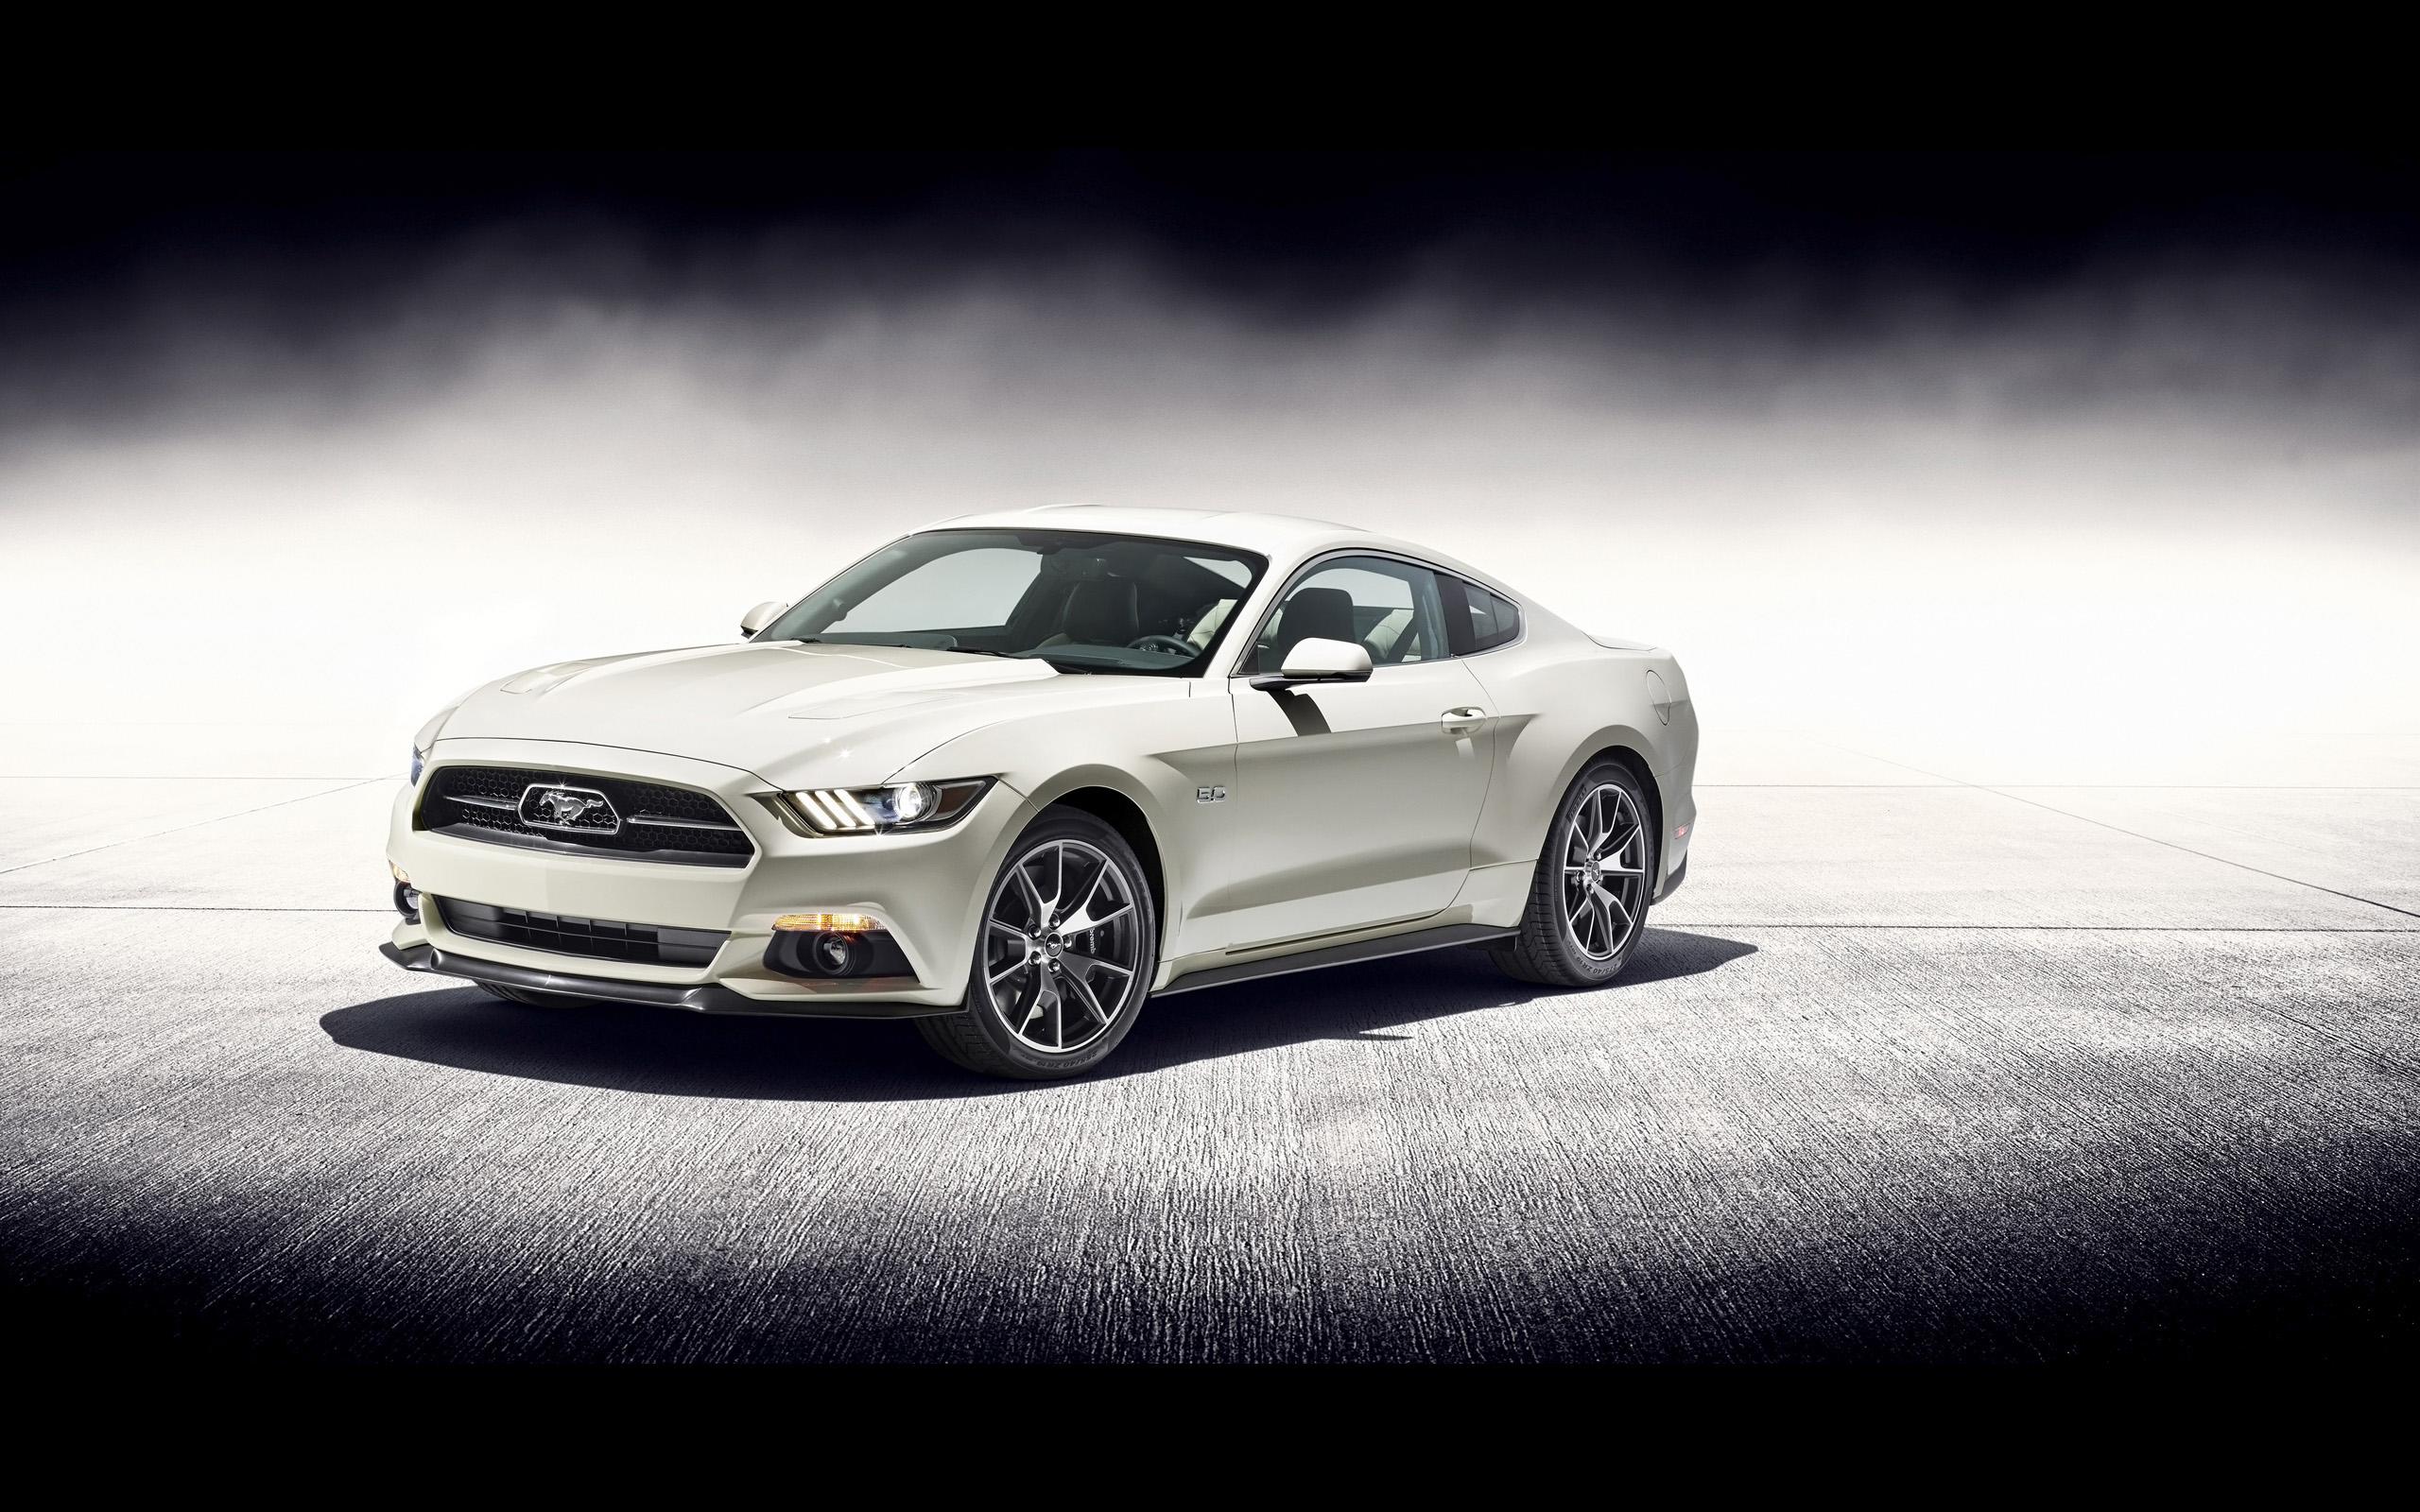 2015 Ford Mustang Gt 50 Year Limited Edition Wallpapers Mustangspecs Com